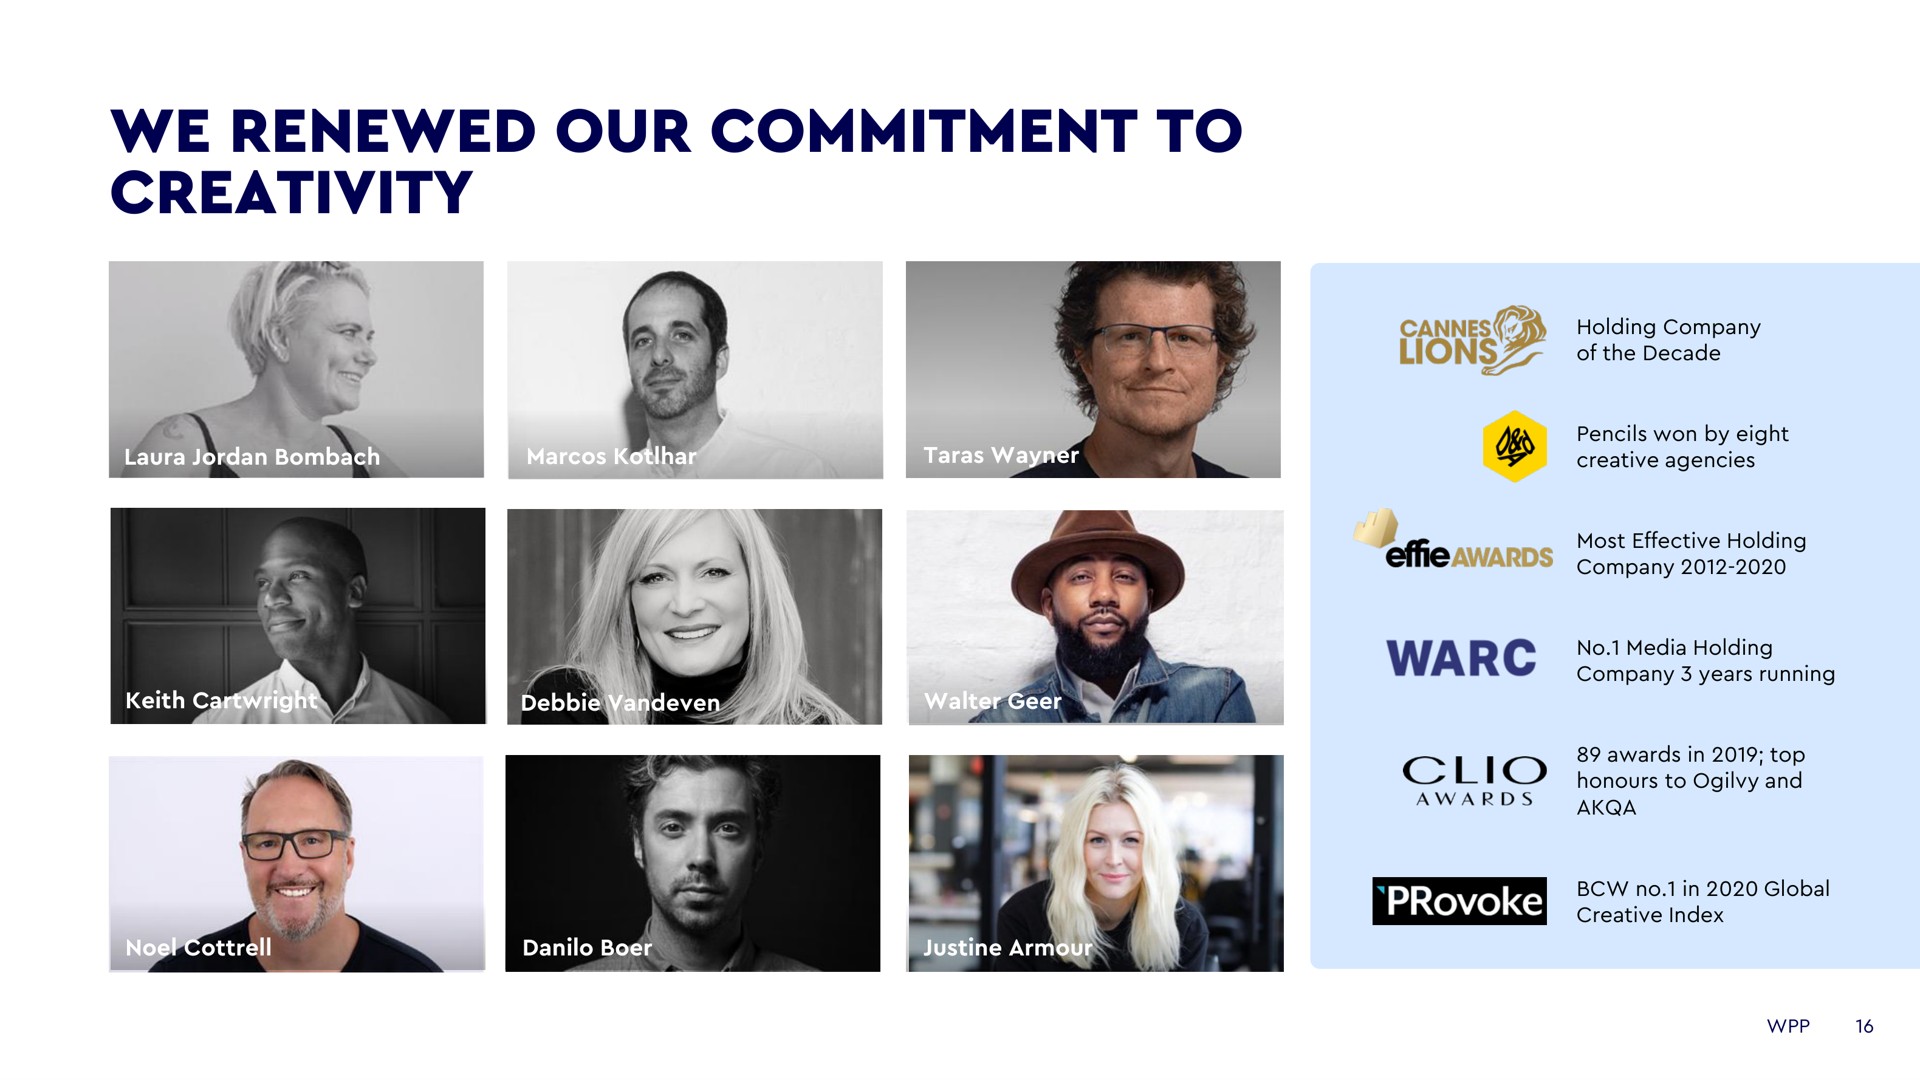 we renewed our commitment to creativity | WPP